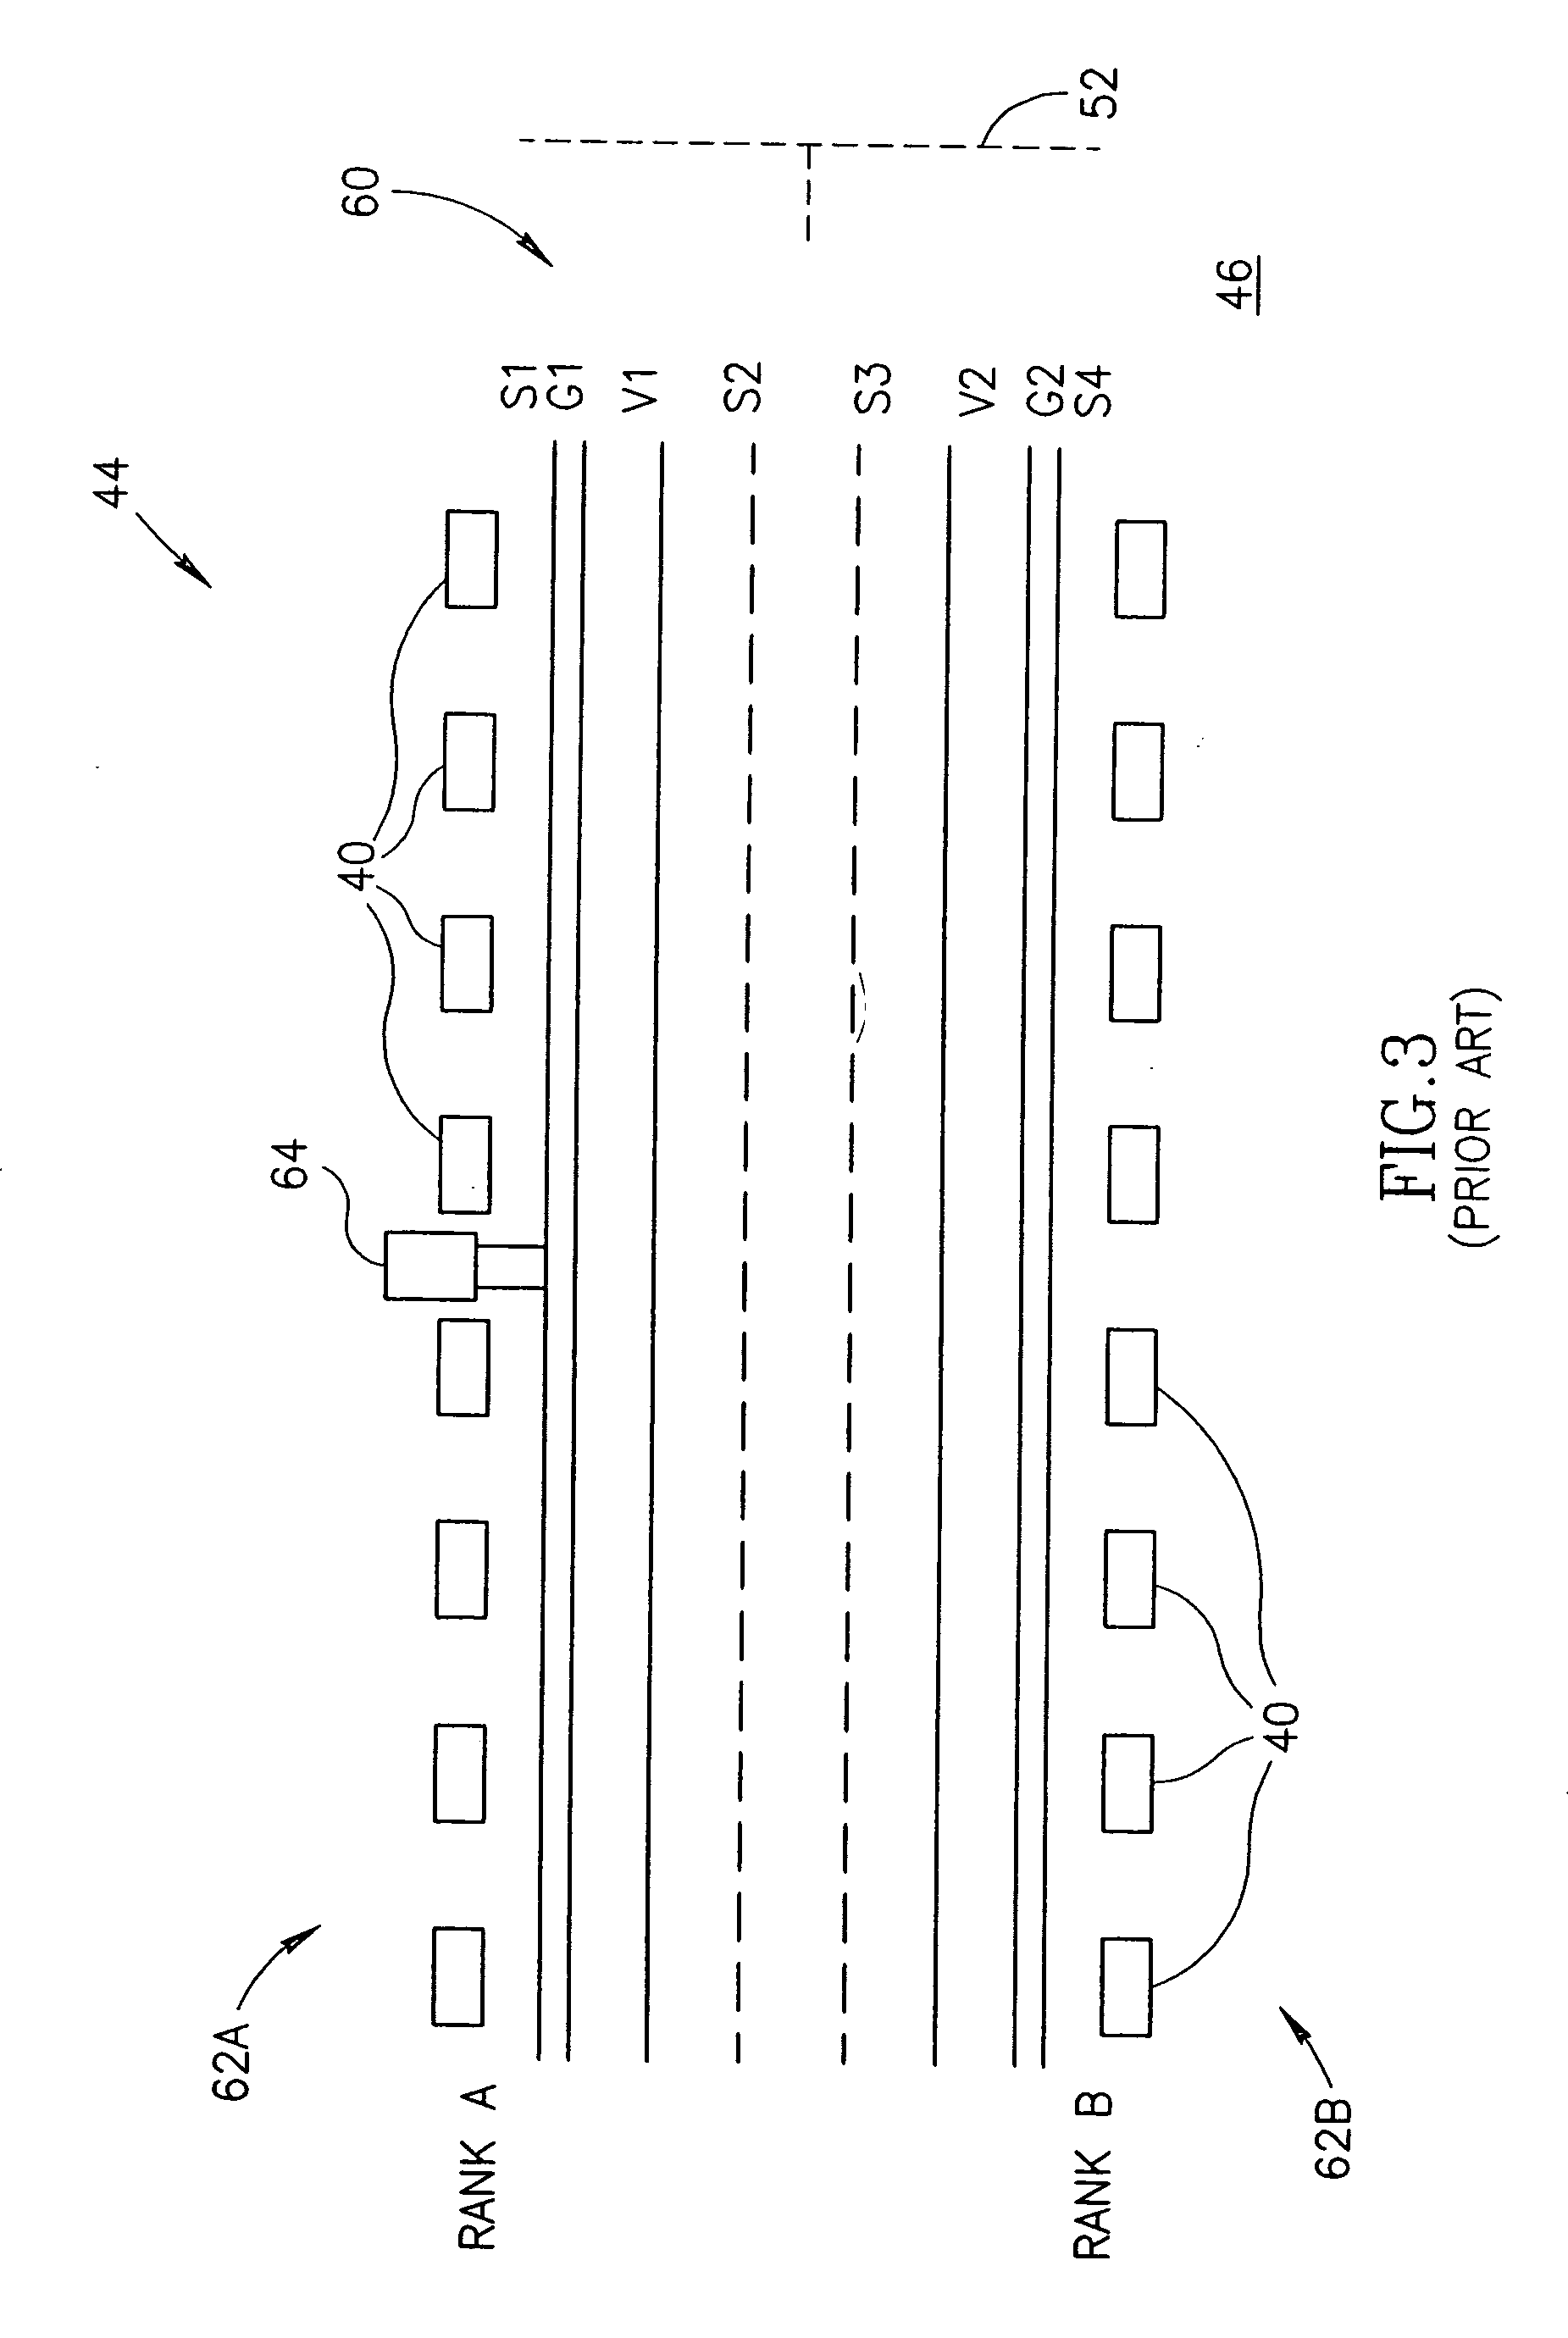 Apparatus and methods for a physical layout of simultaneously sub-accessible memory modules